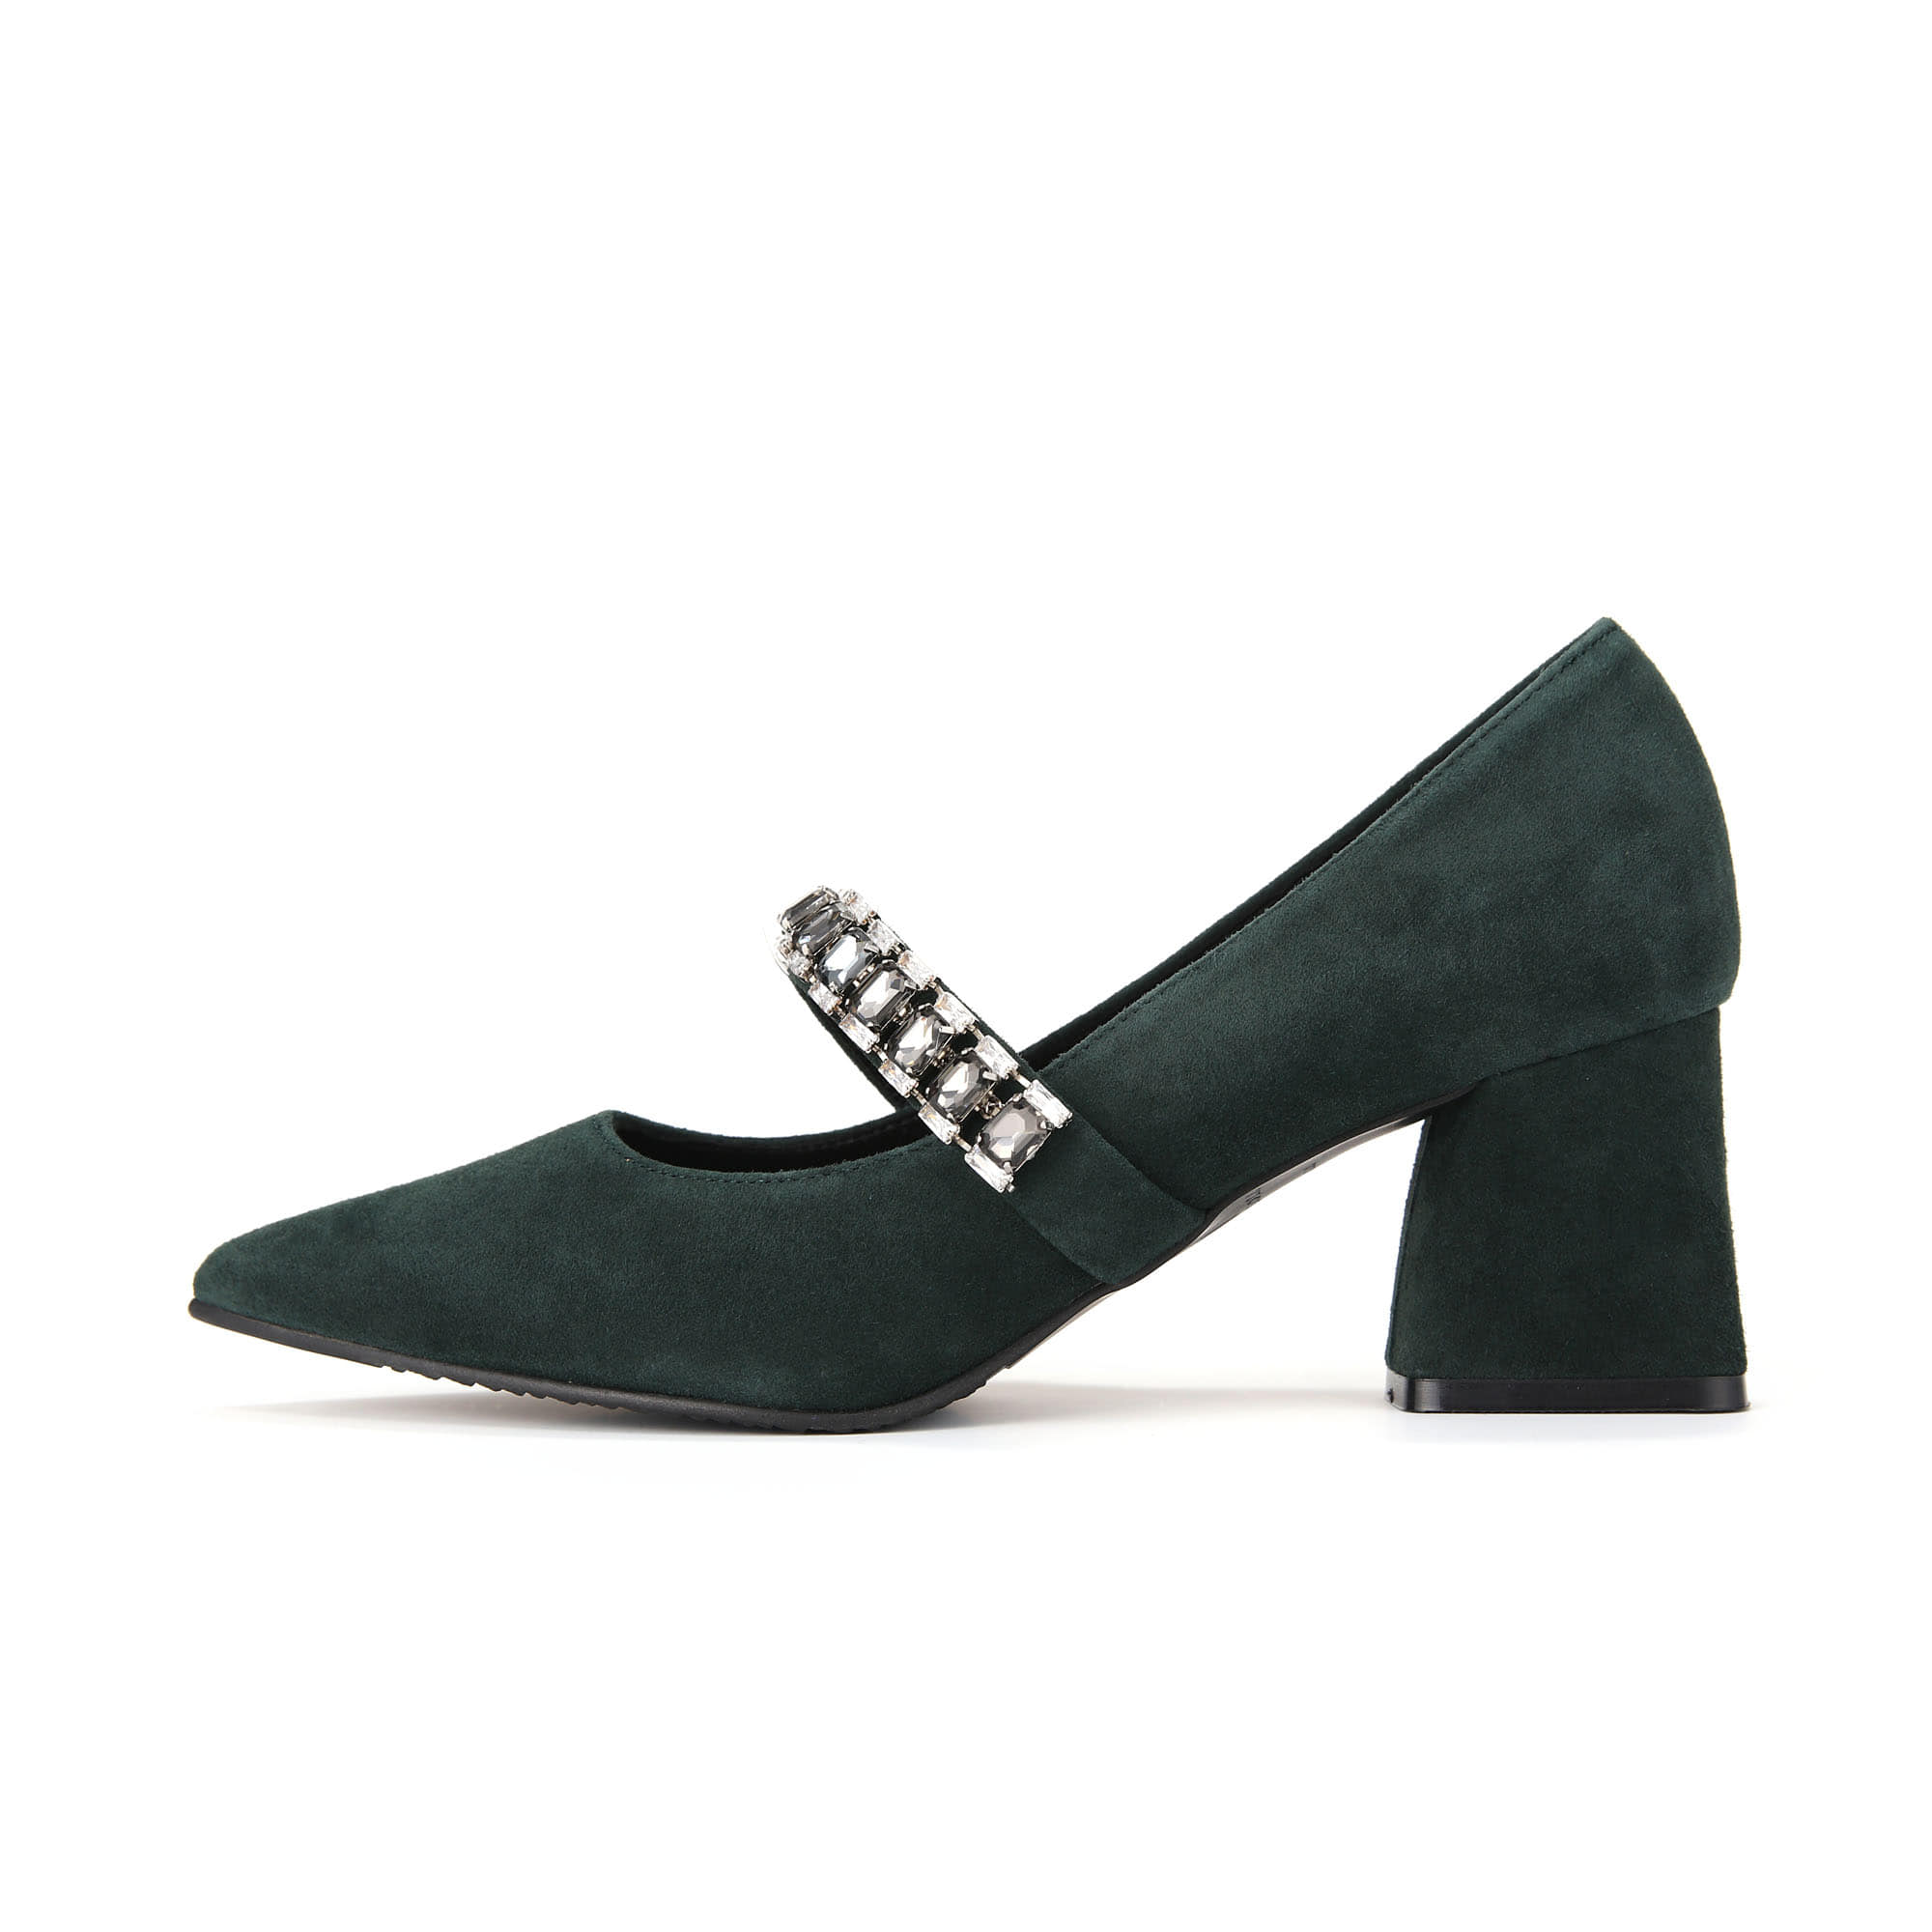 Band jewelry pumps [8354] (Green)